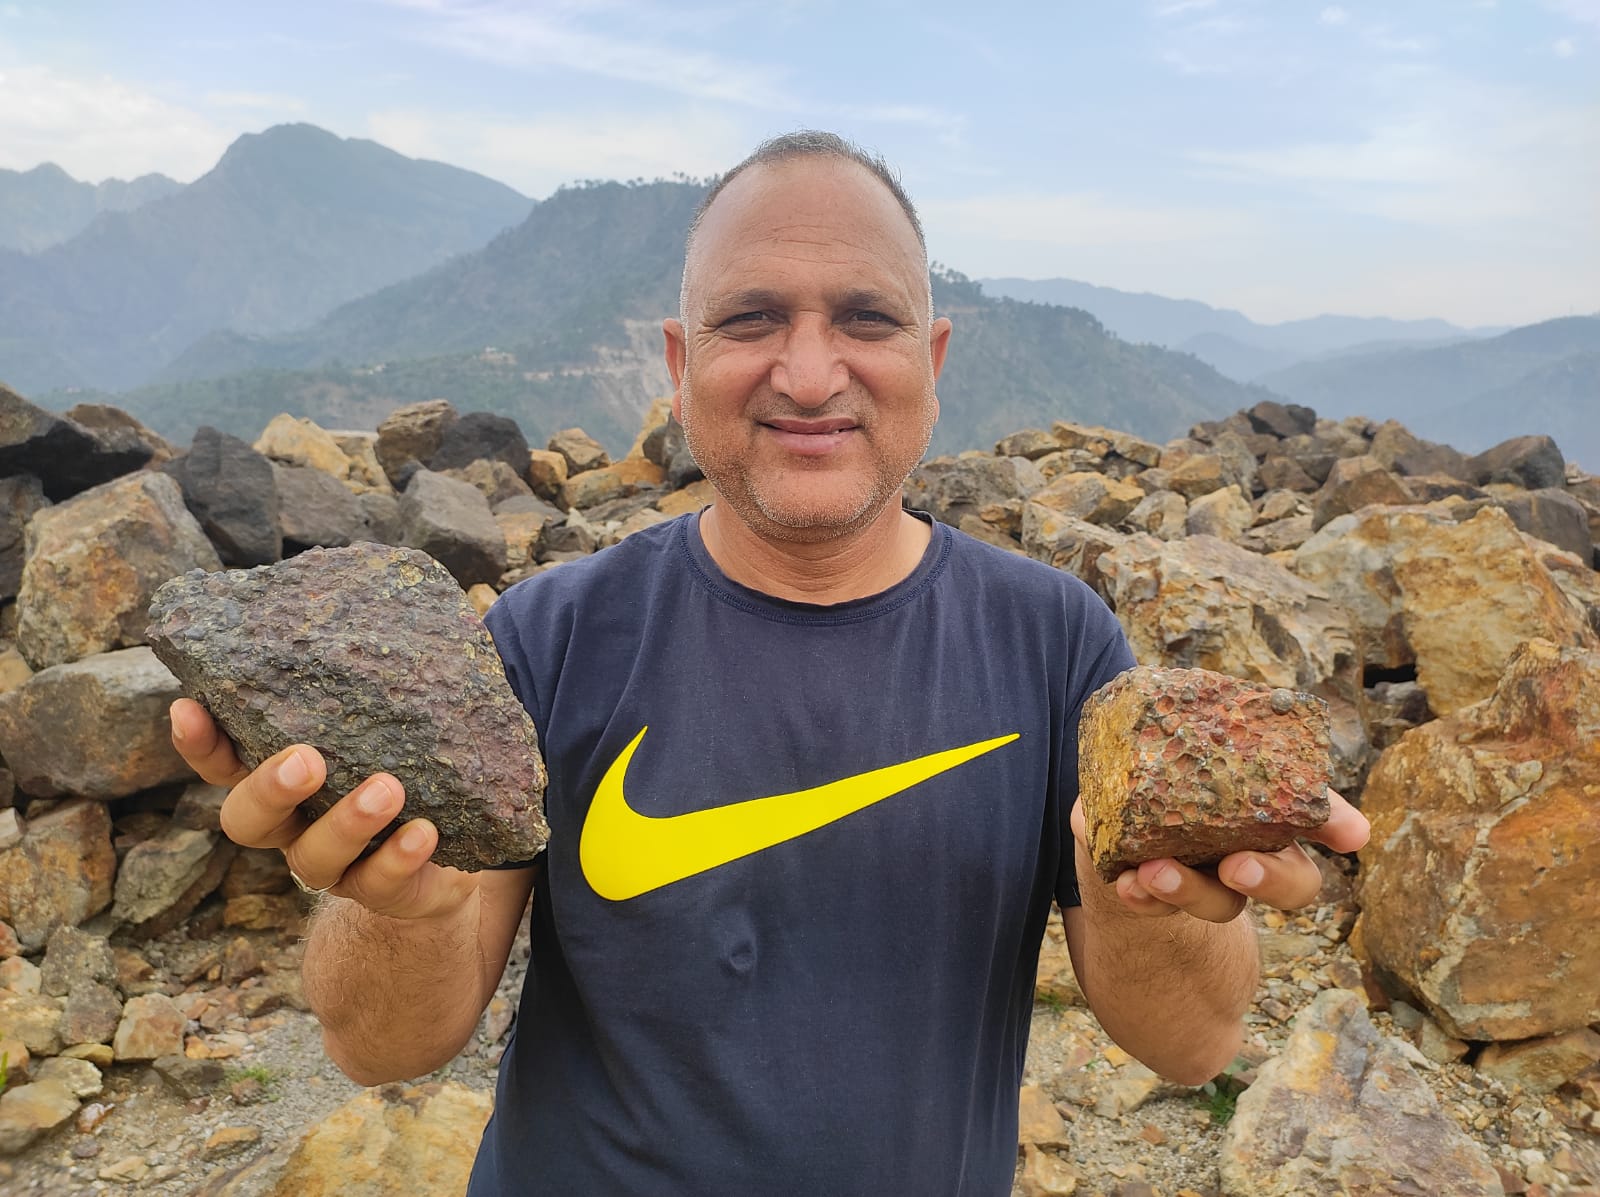 A smiling man, wearing a black shirt with a yellow tick on it, holds up two rocks, one in each hand, as mountains loom in the background.